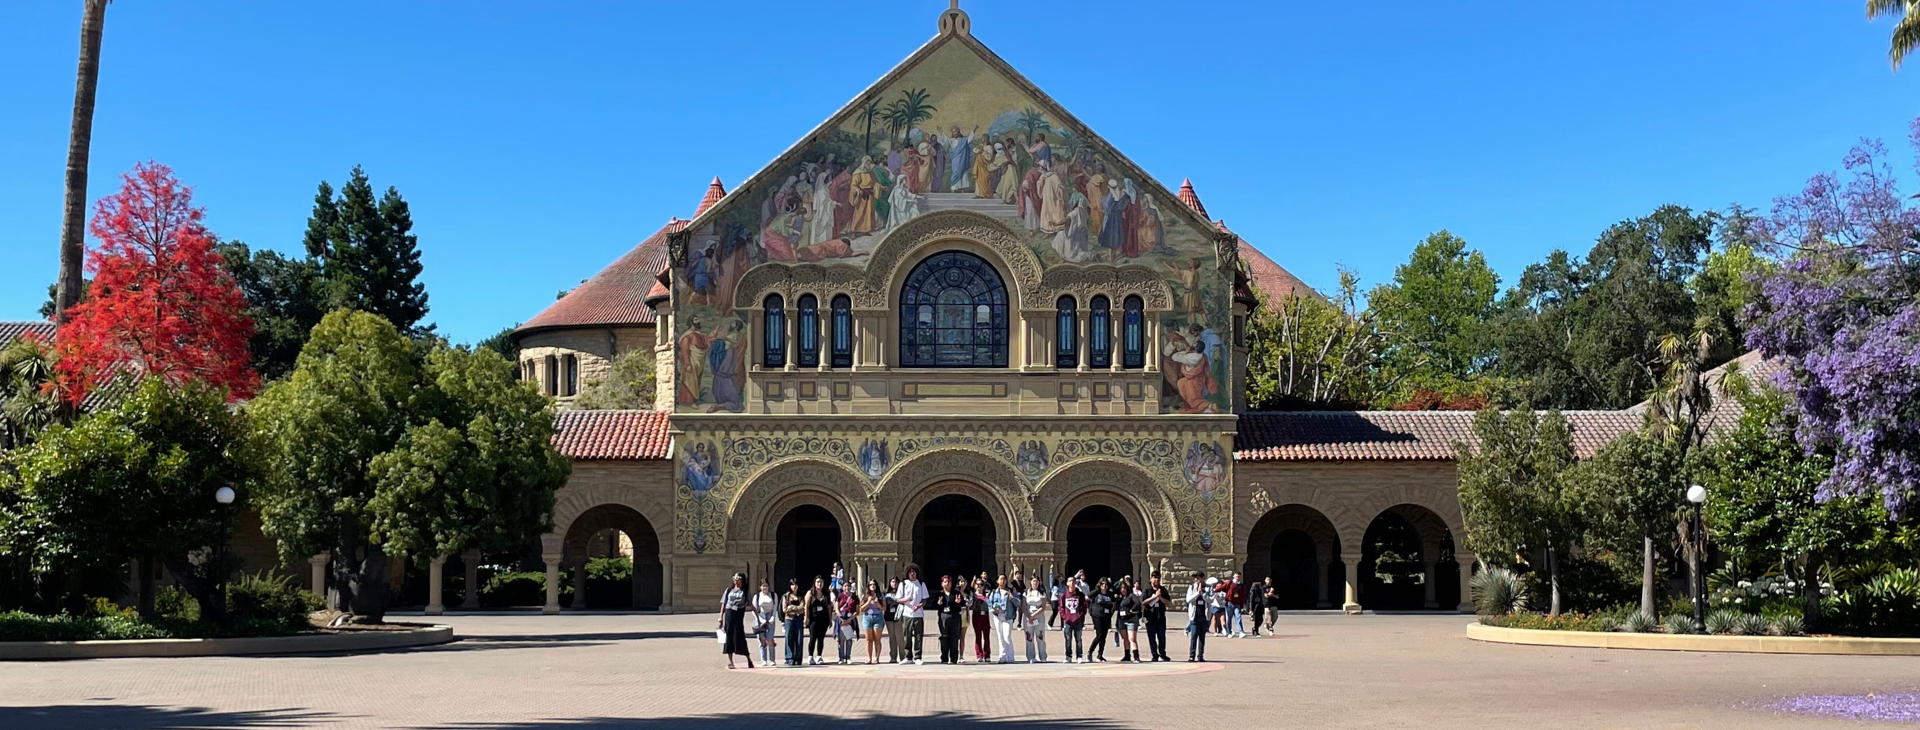 Northern Cal Colleges Tour: Stanford Church